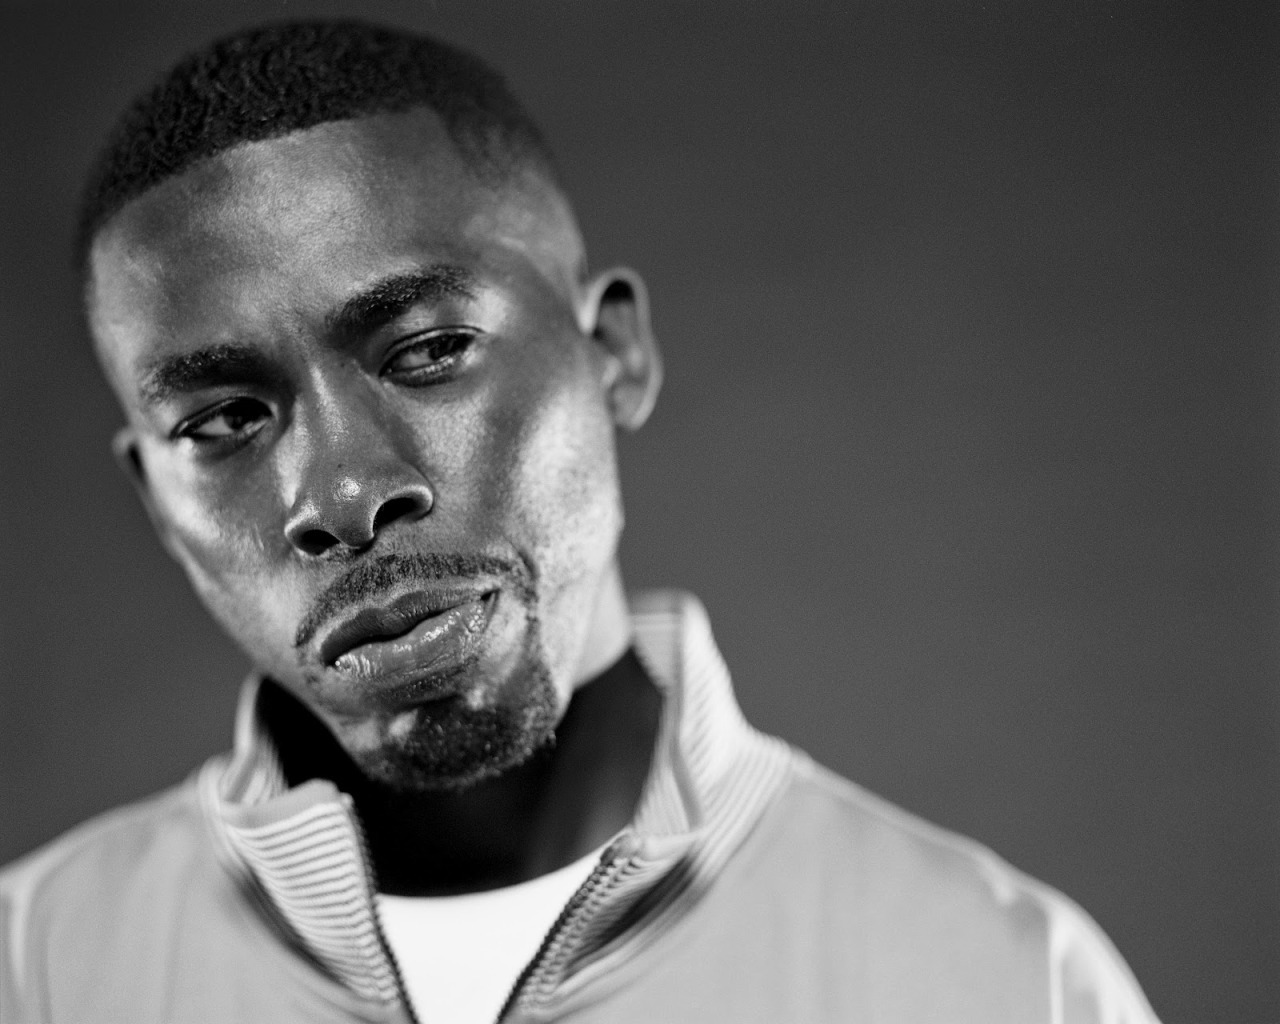 Happy Birthday To Wu Tang Clan Co-Founder The GZA!